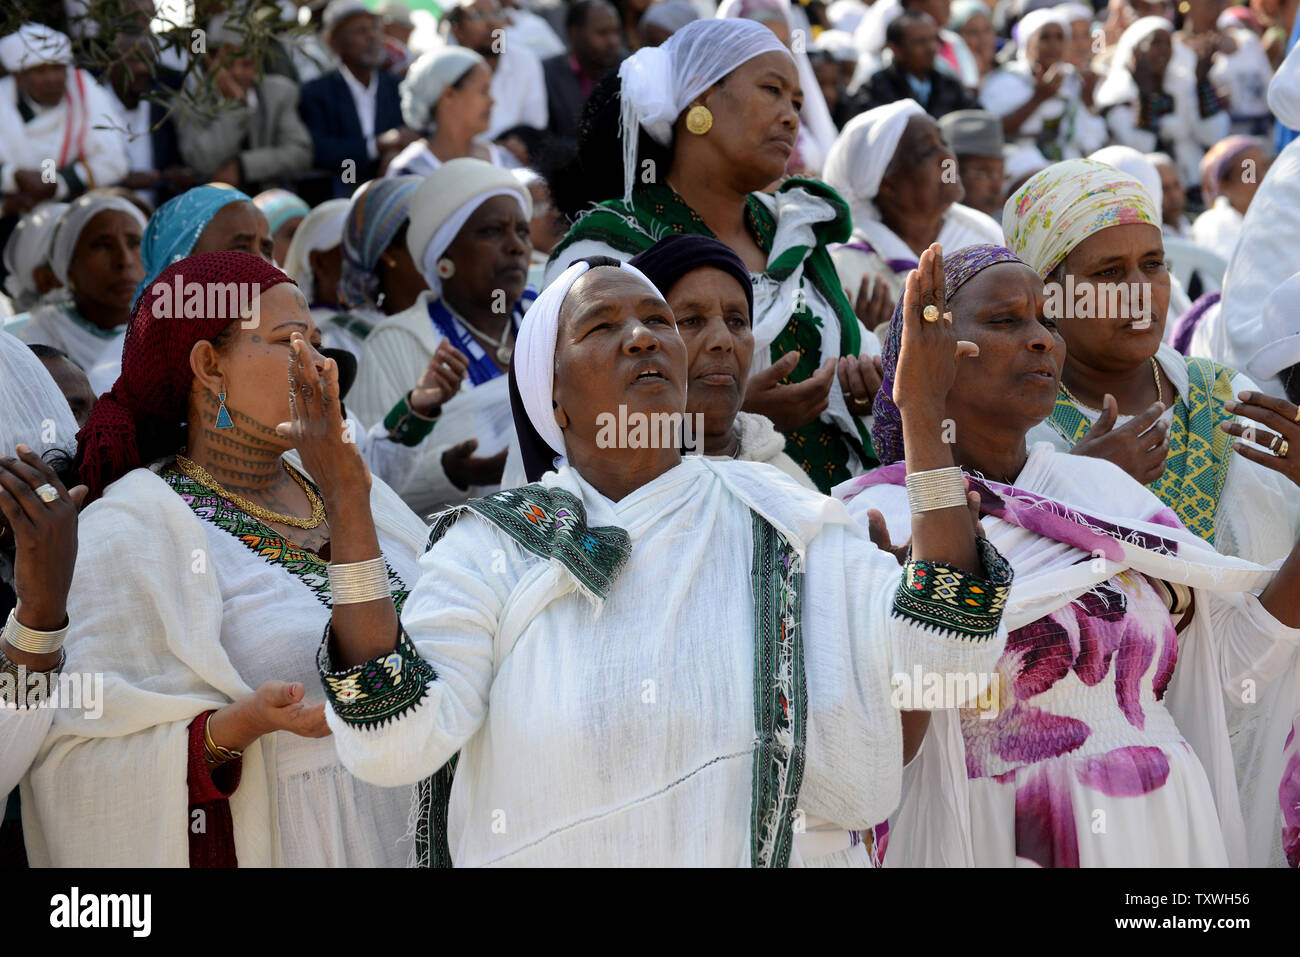 Ethiopian Jewish women pray during the Sigd holiday on a hill overlooking Jerusalem, October 31, 2013. The Sigd holiday use to mark the desire of Ethiopian Jews to return to Zion, while today thousands of Ethiopians gather  to pray and rejoice for their return to Jerusalem and  the renewal of the alliance between God, the people and the Torah.   UPI/Debbie Hill Stock Photo